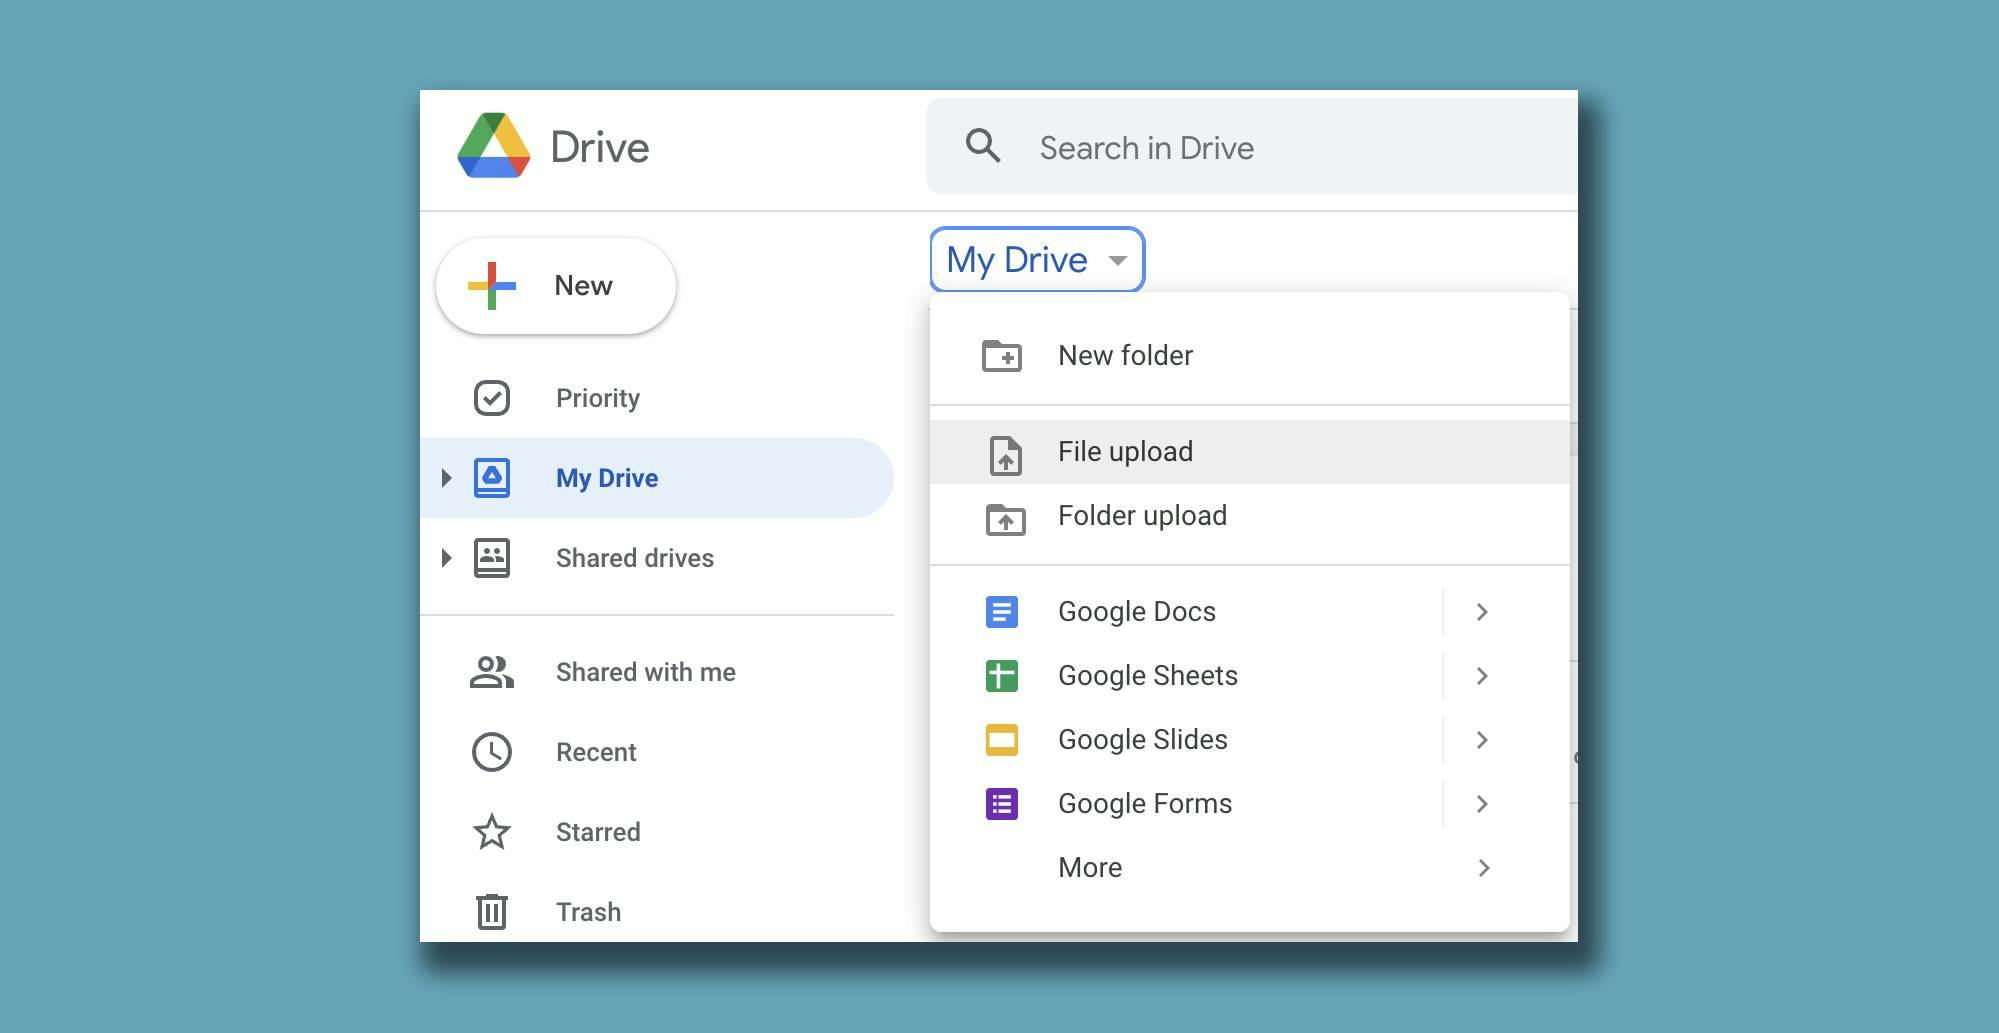 A screenshot of the Google Drive 'My Drive' page. Under the 'My Drive' drop-down list, 'File upload' is highlighted.